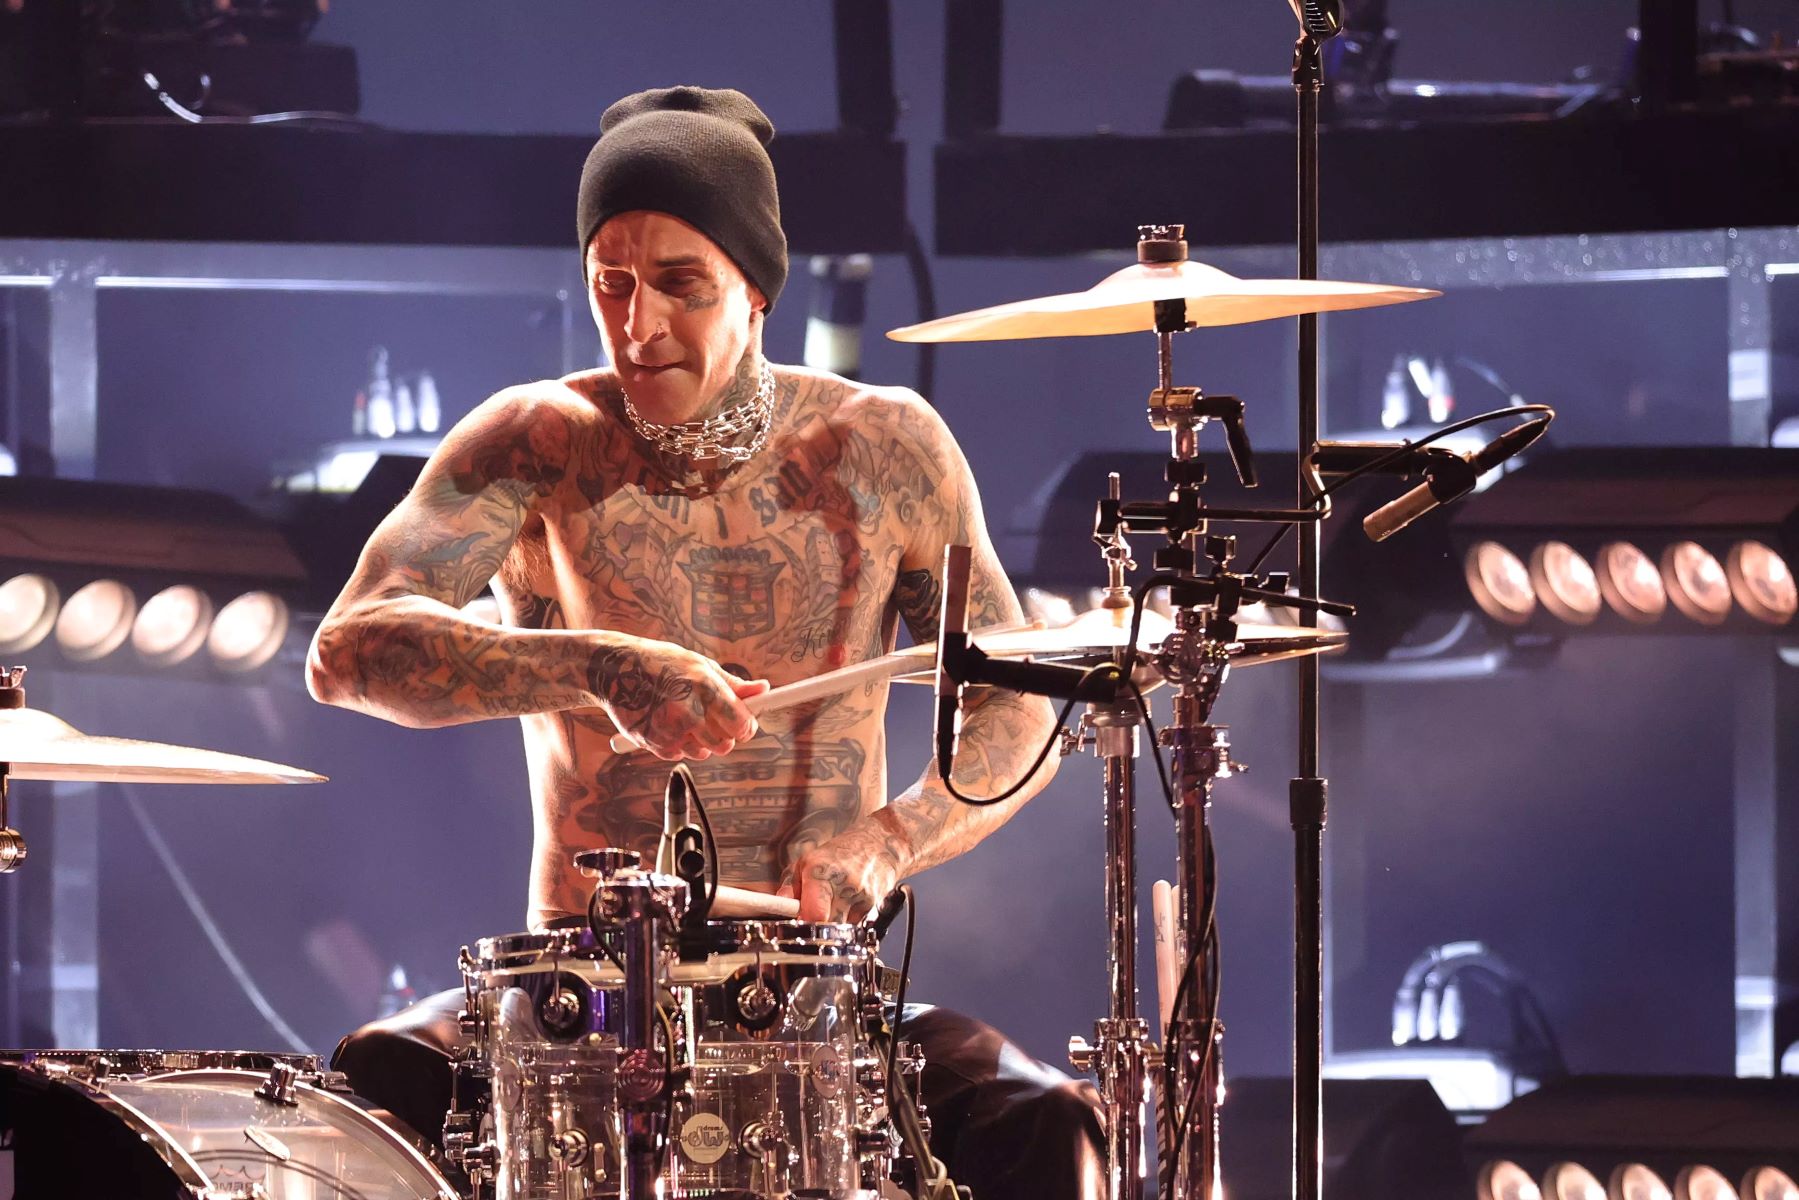 Who Did Travis Barker Play Drums For